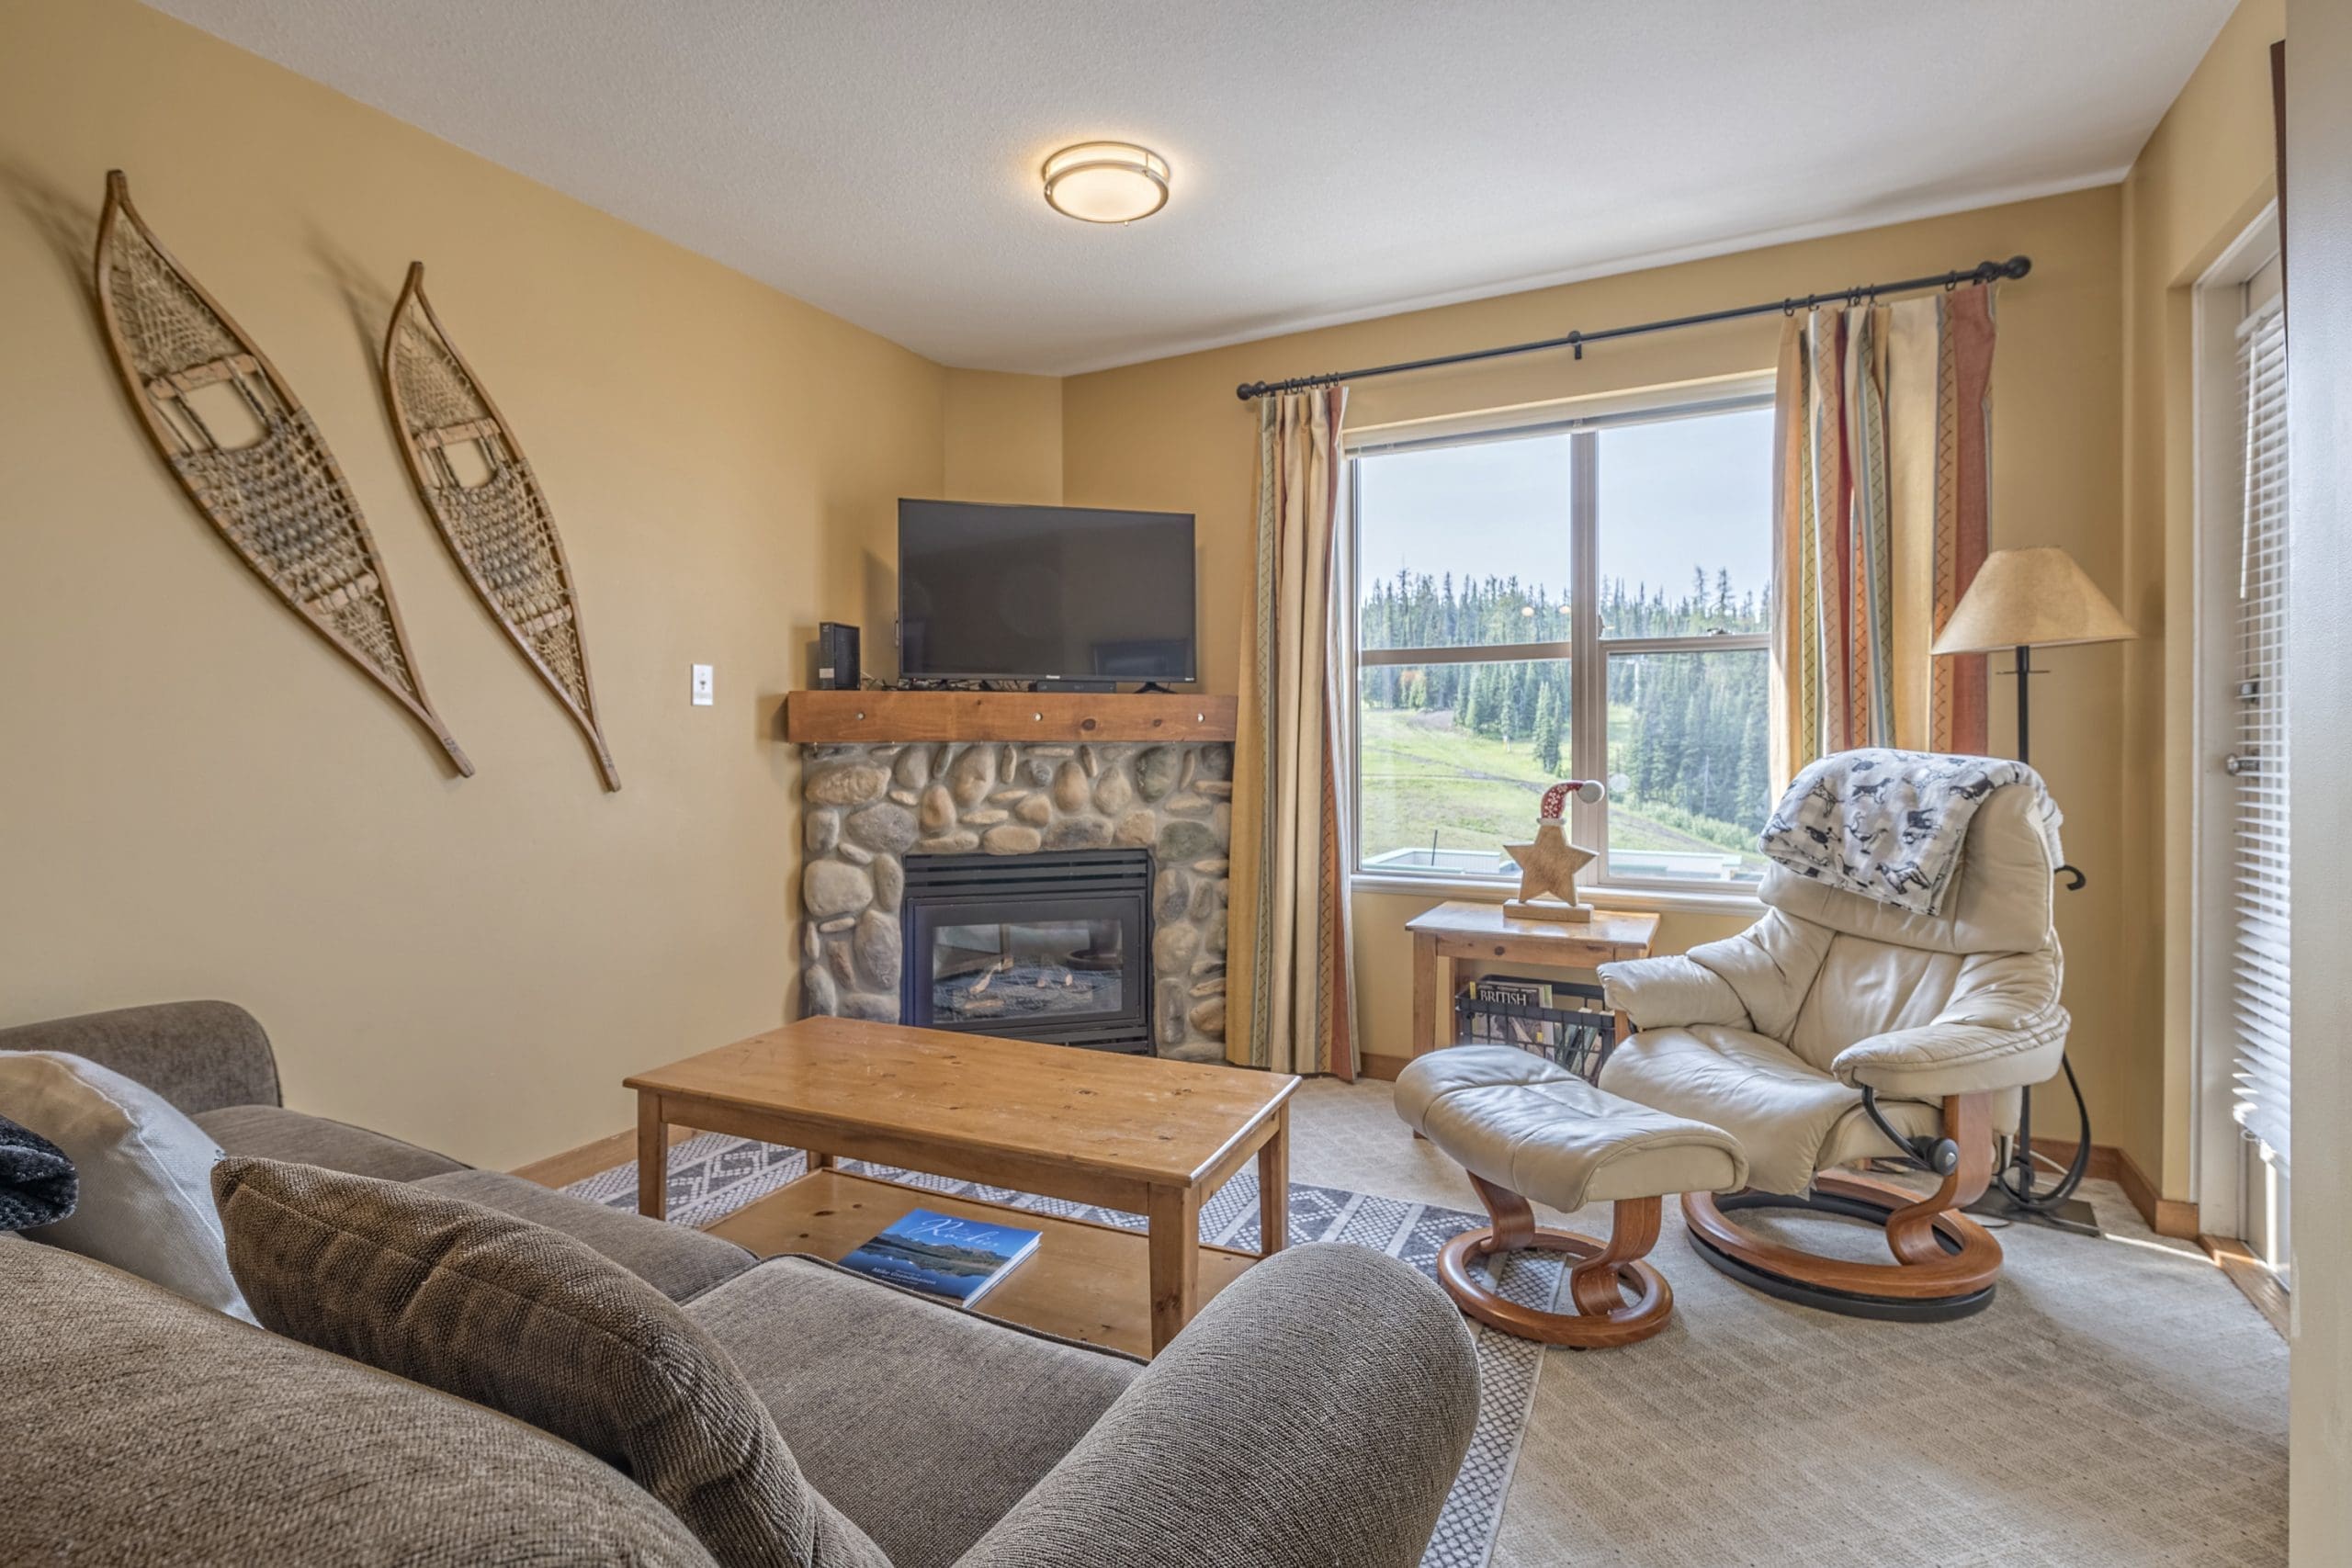 Top Floor Condo with balcony overlooking the Silver Queen Chair. Gas fireplace, TV, and it's pet-friendly!